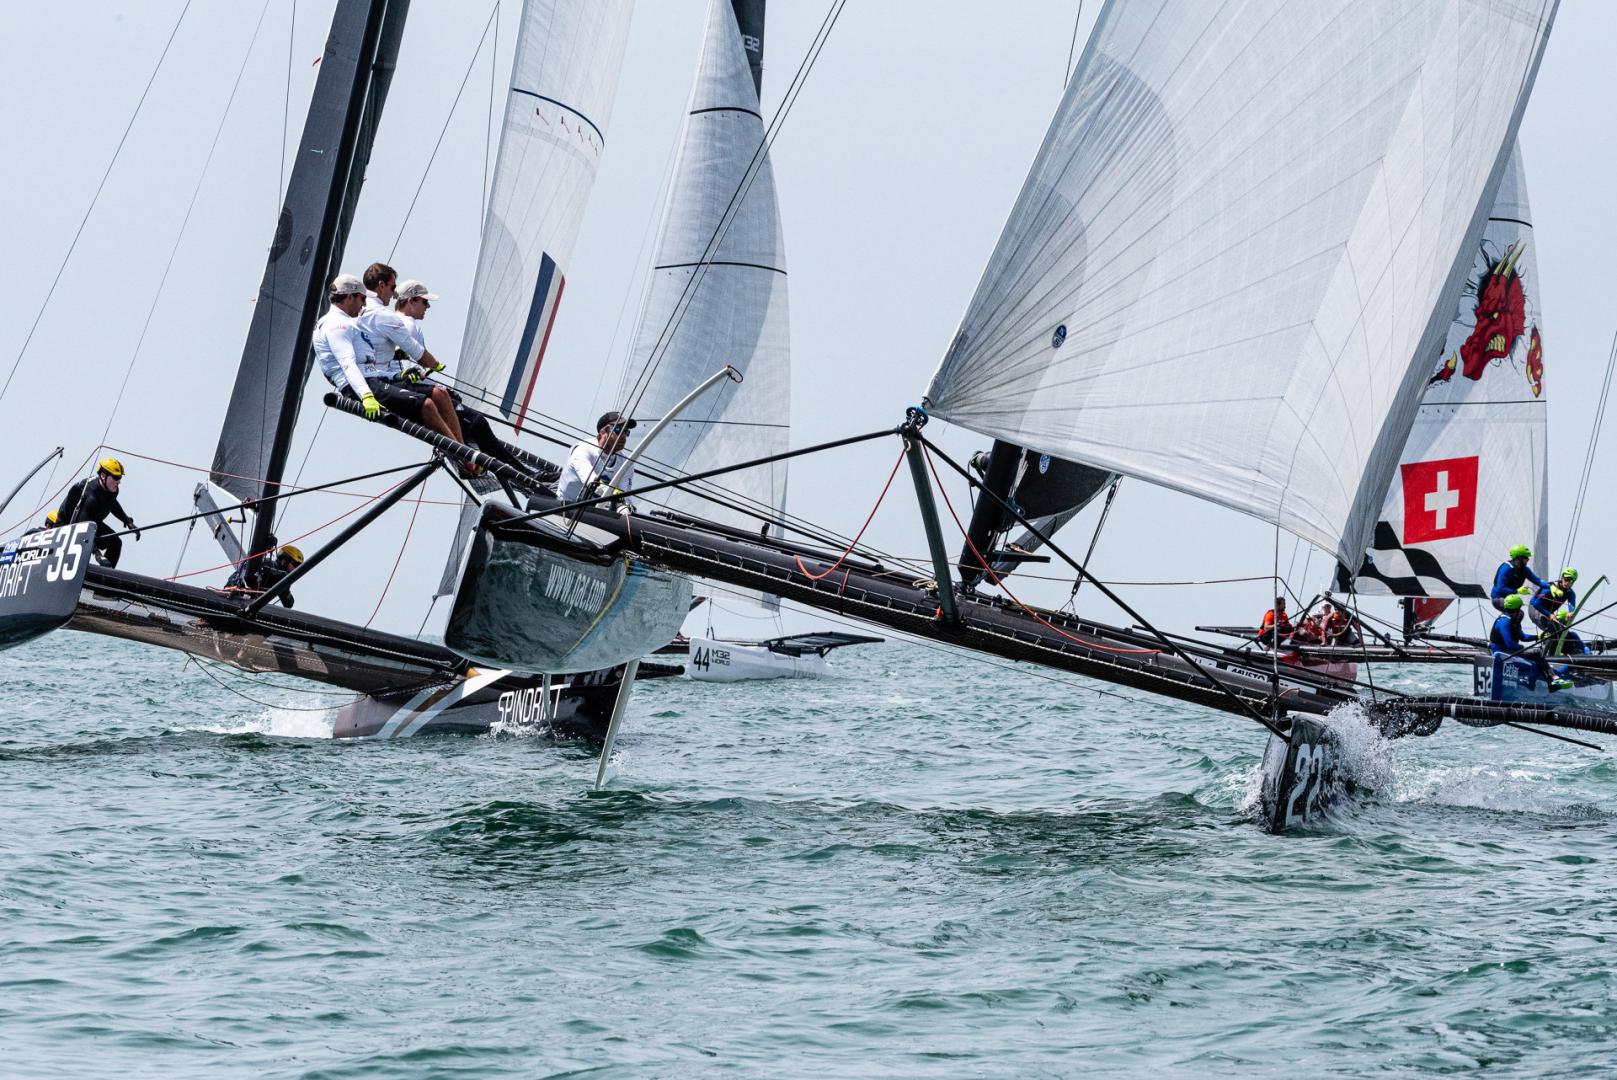 Ian Williams' GAC Pindar was outstripped by Spindrift racing on day two